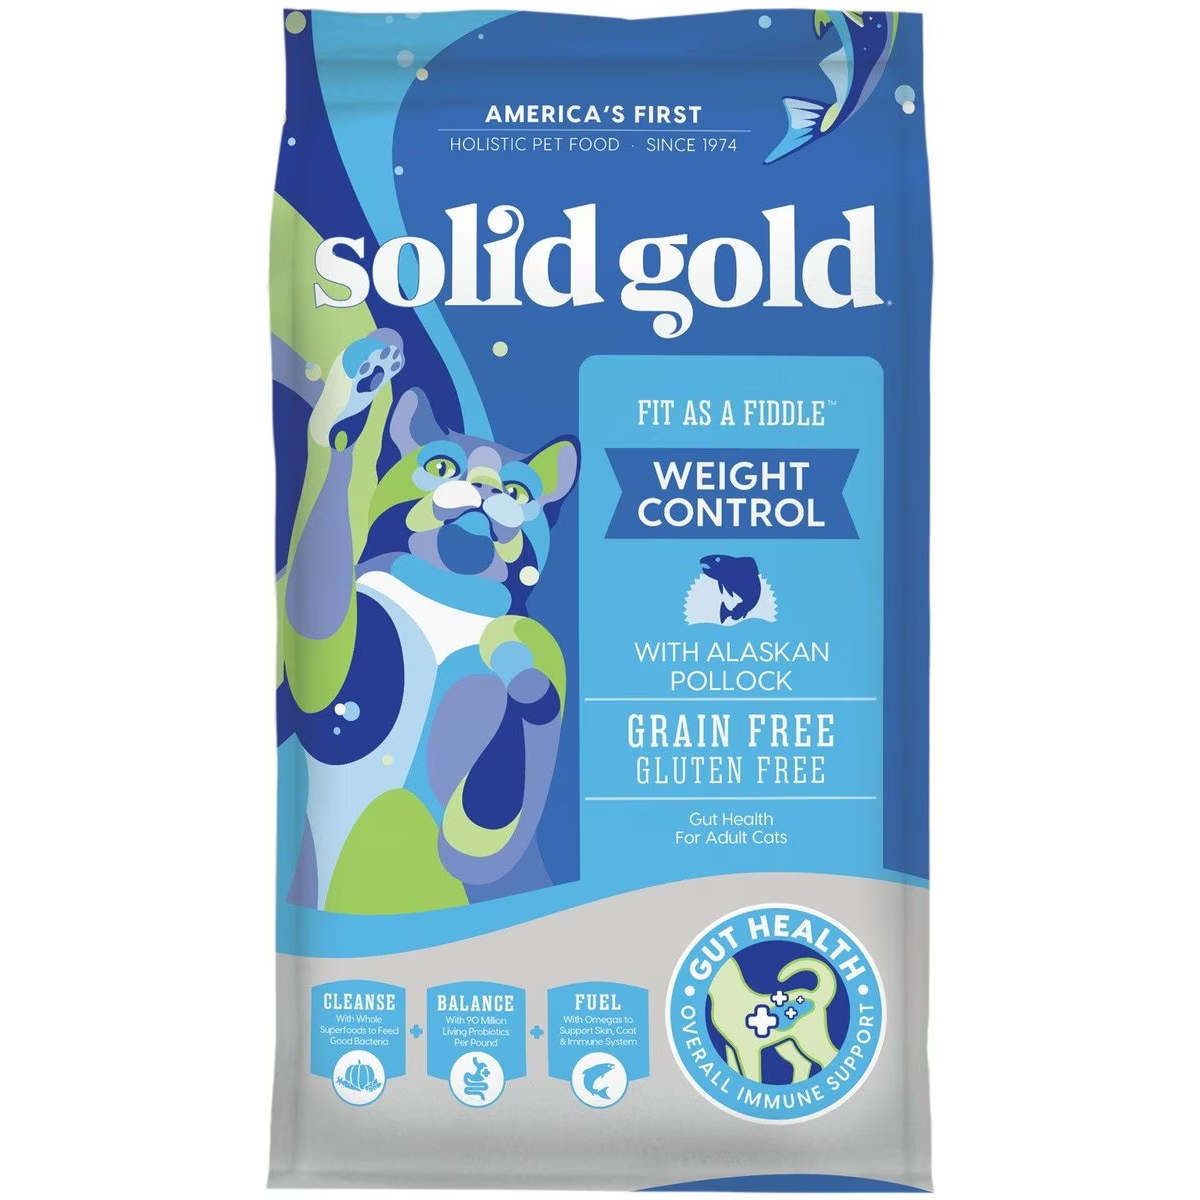 Solid Gold Fit as a Fiddle Weight Control with Alaskan Pollock Grain New